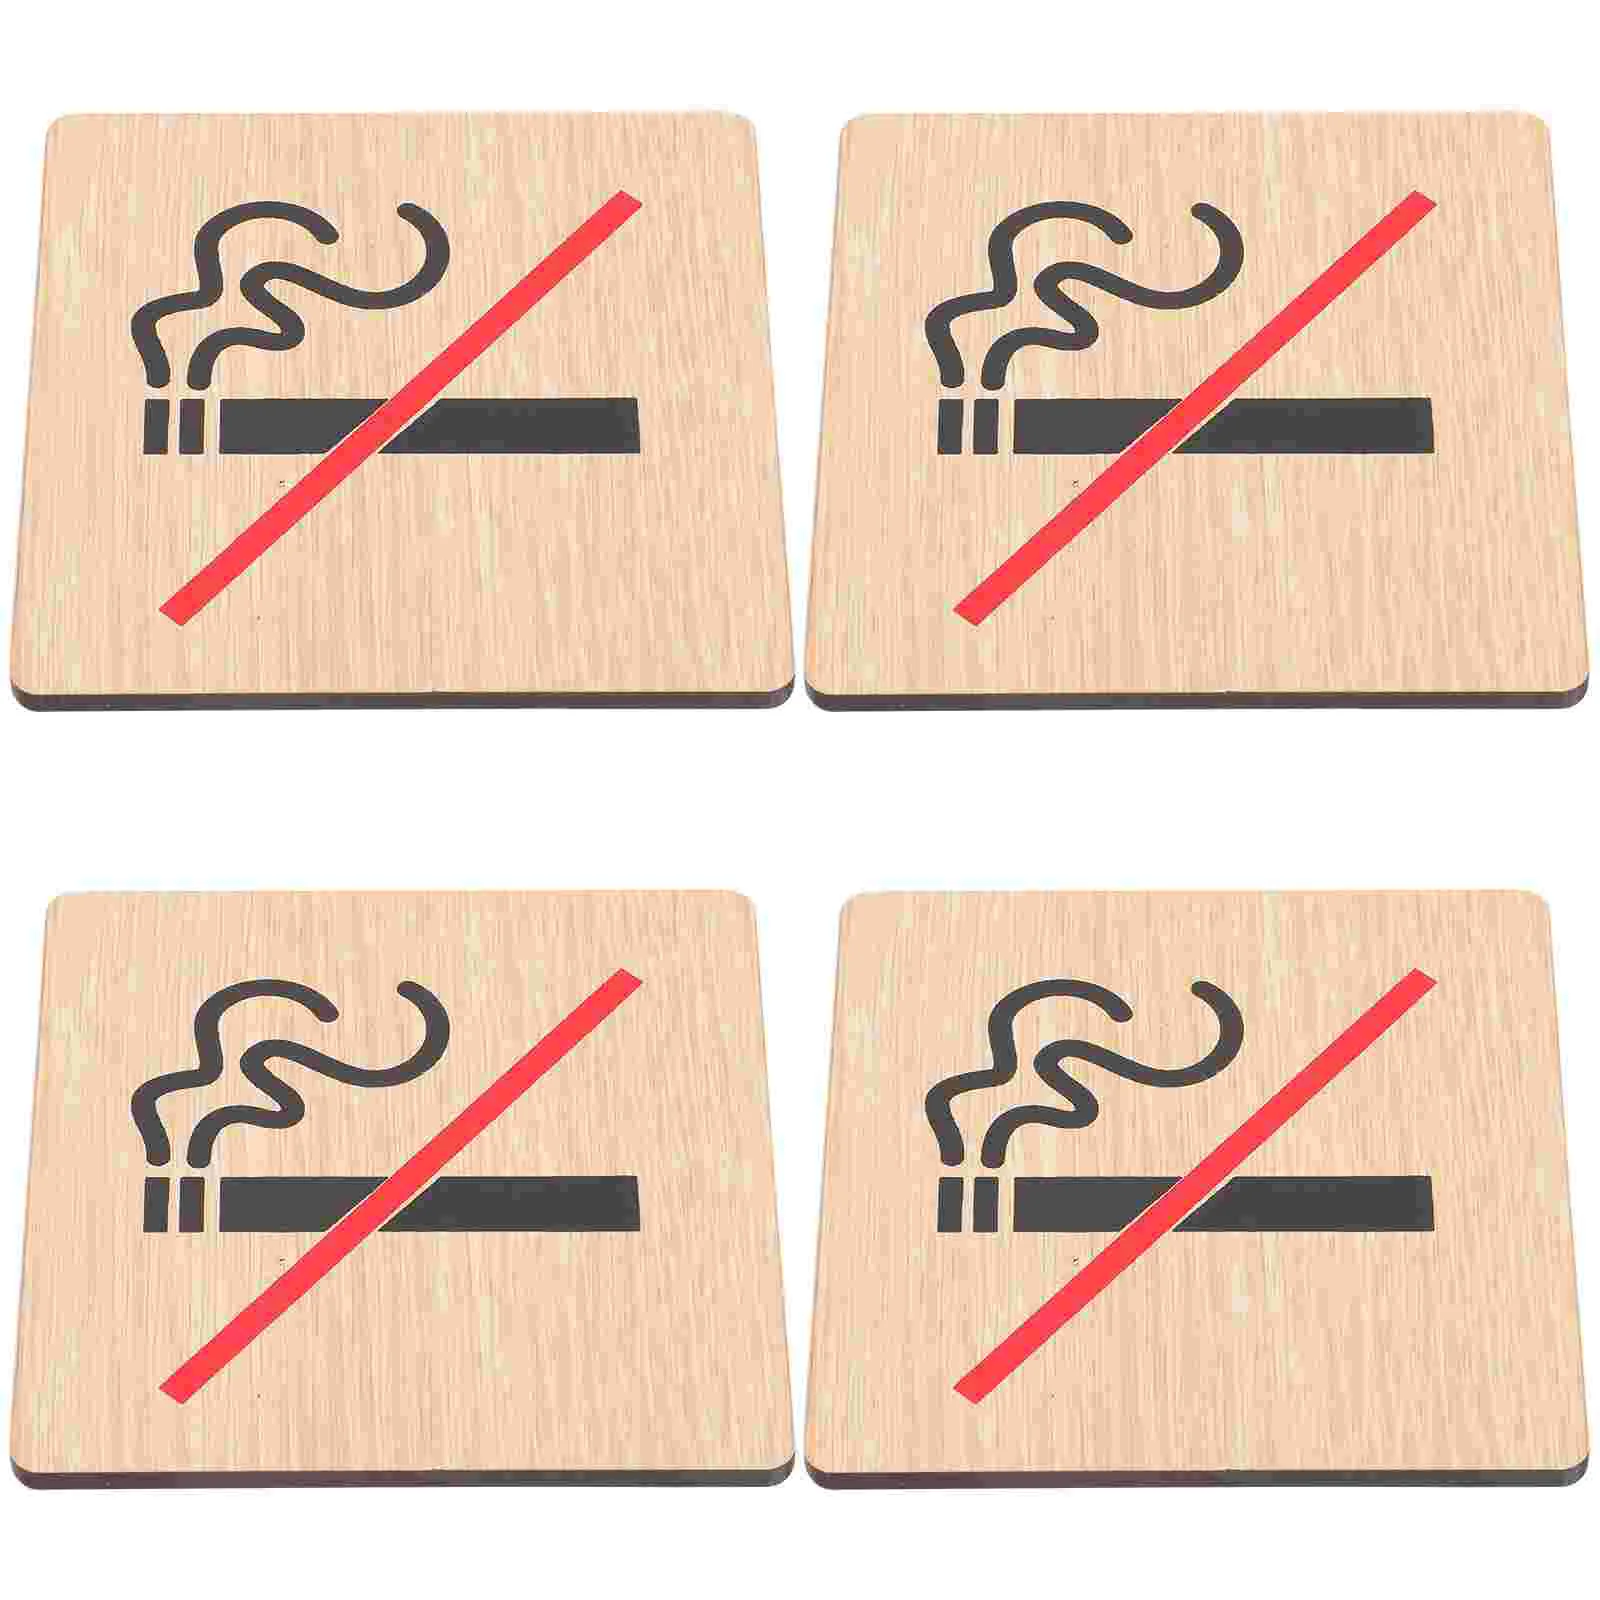 

4 Pcs No Smoking Sign Wooden Sticker Reminding Signs Stickers Tips Warning Non-smoking Hotel Boards Public